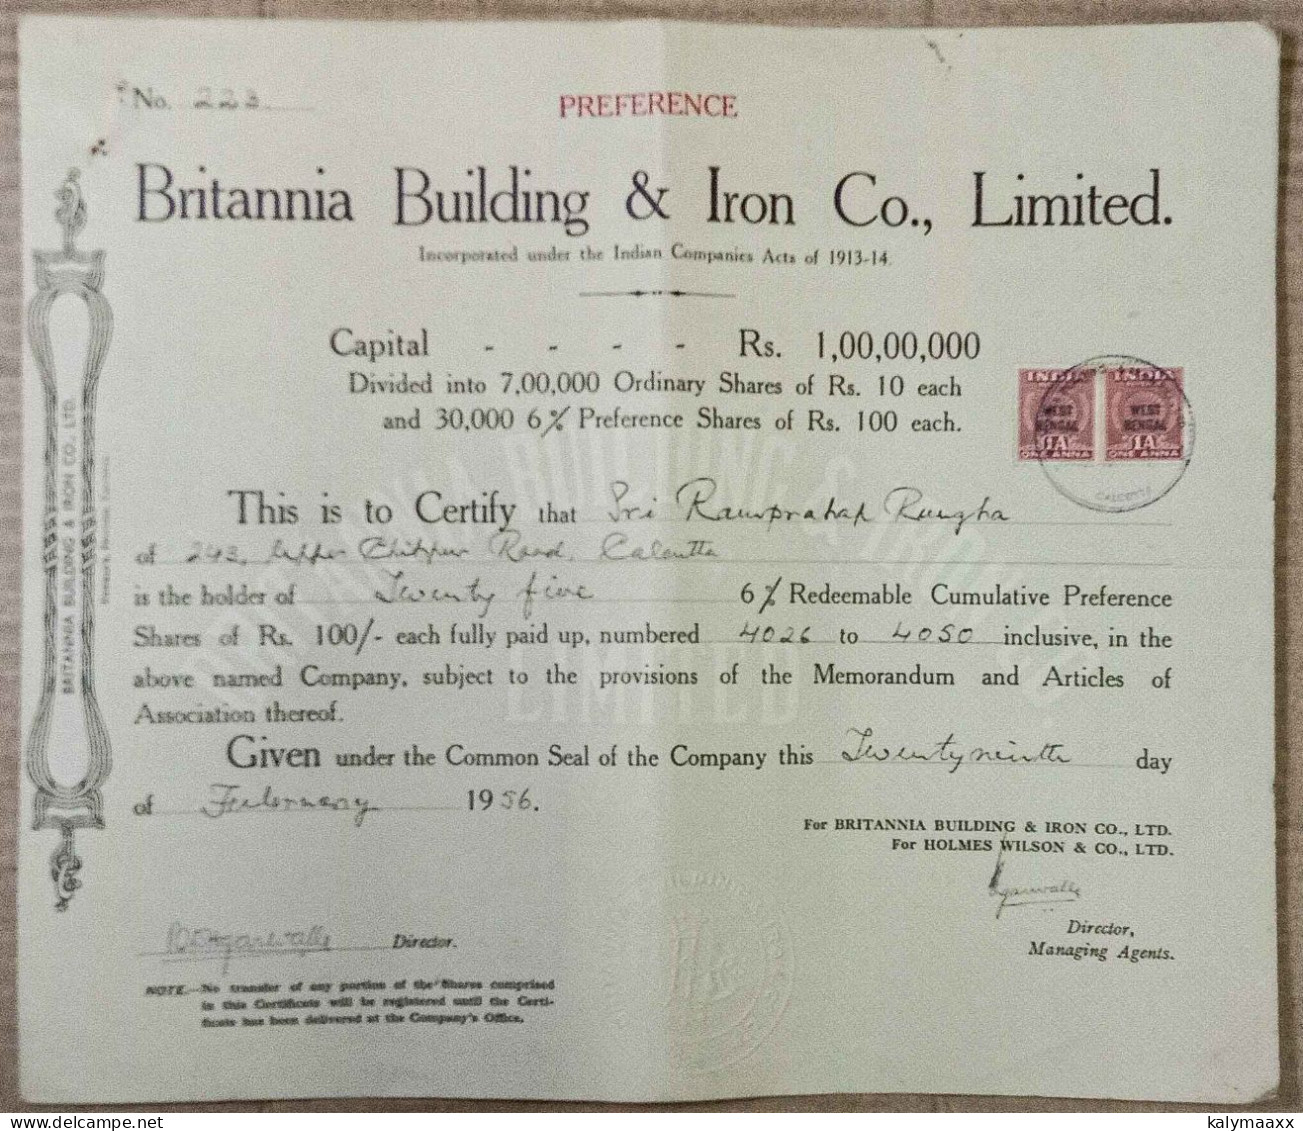 BRITISH INDIA 1956 BRITANNIA BUILDING & IRON CO., LIMITED.....PREFERENCE SHARE CERTIFICATE - Industry